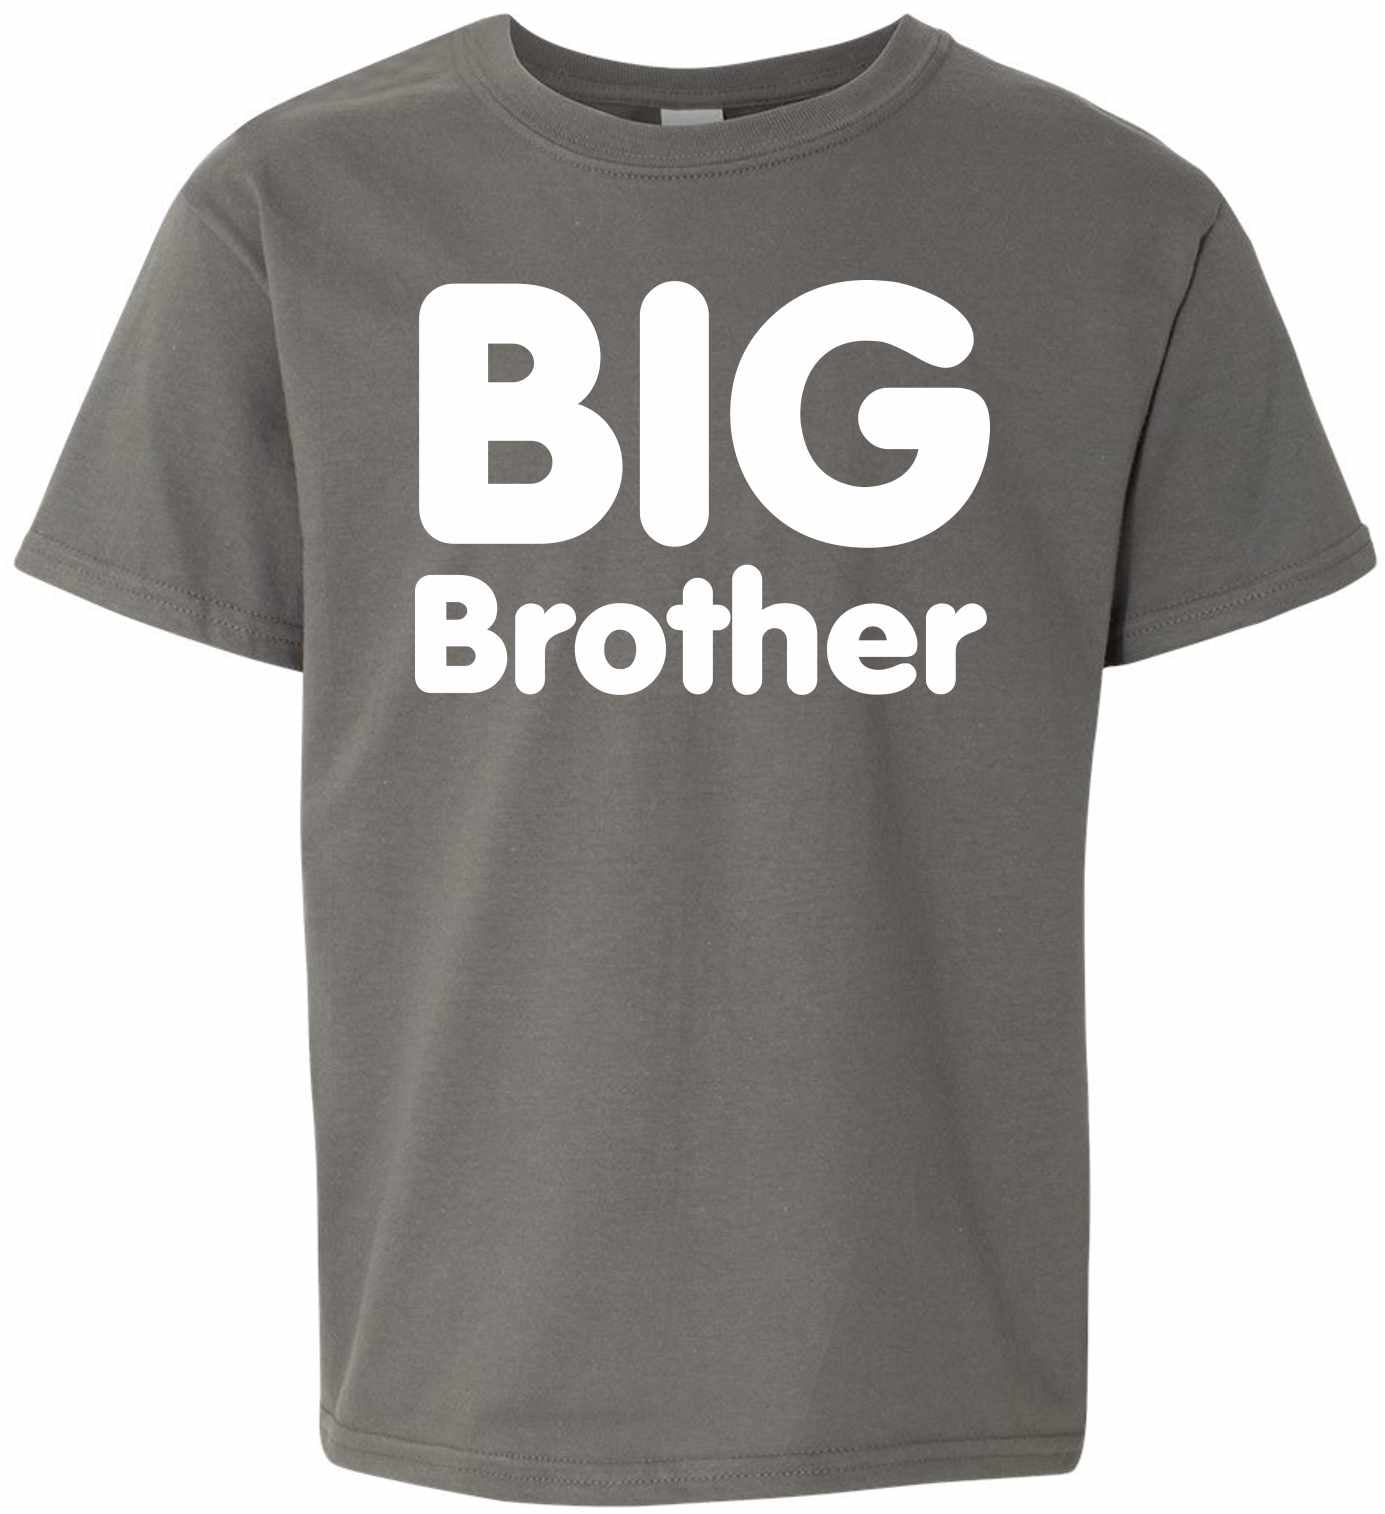 BIG BROTHER Youth T-Shirt (#809-201)